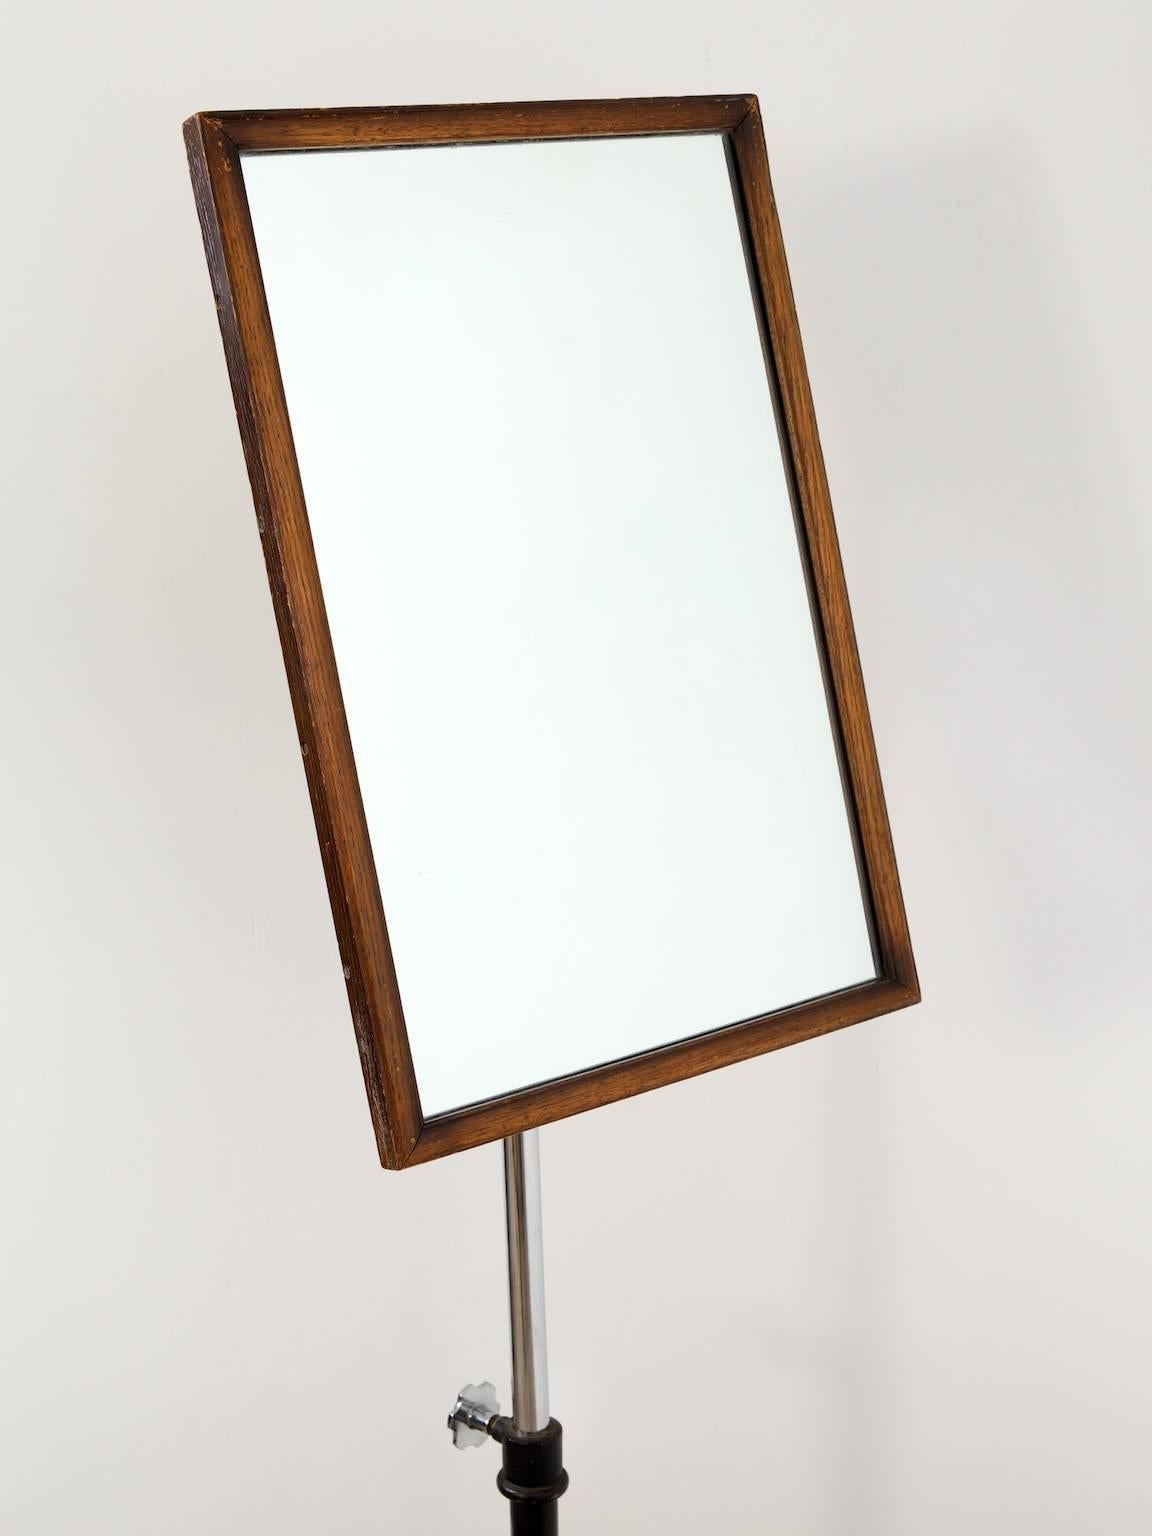 A clothing outfitter's adjustable mirror.

Black japanned cast iron base with adjustable chrome to support the mahogany framed mirror plate.

English, 1940s.
  